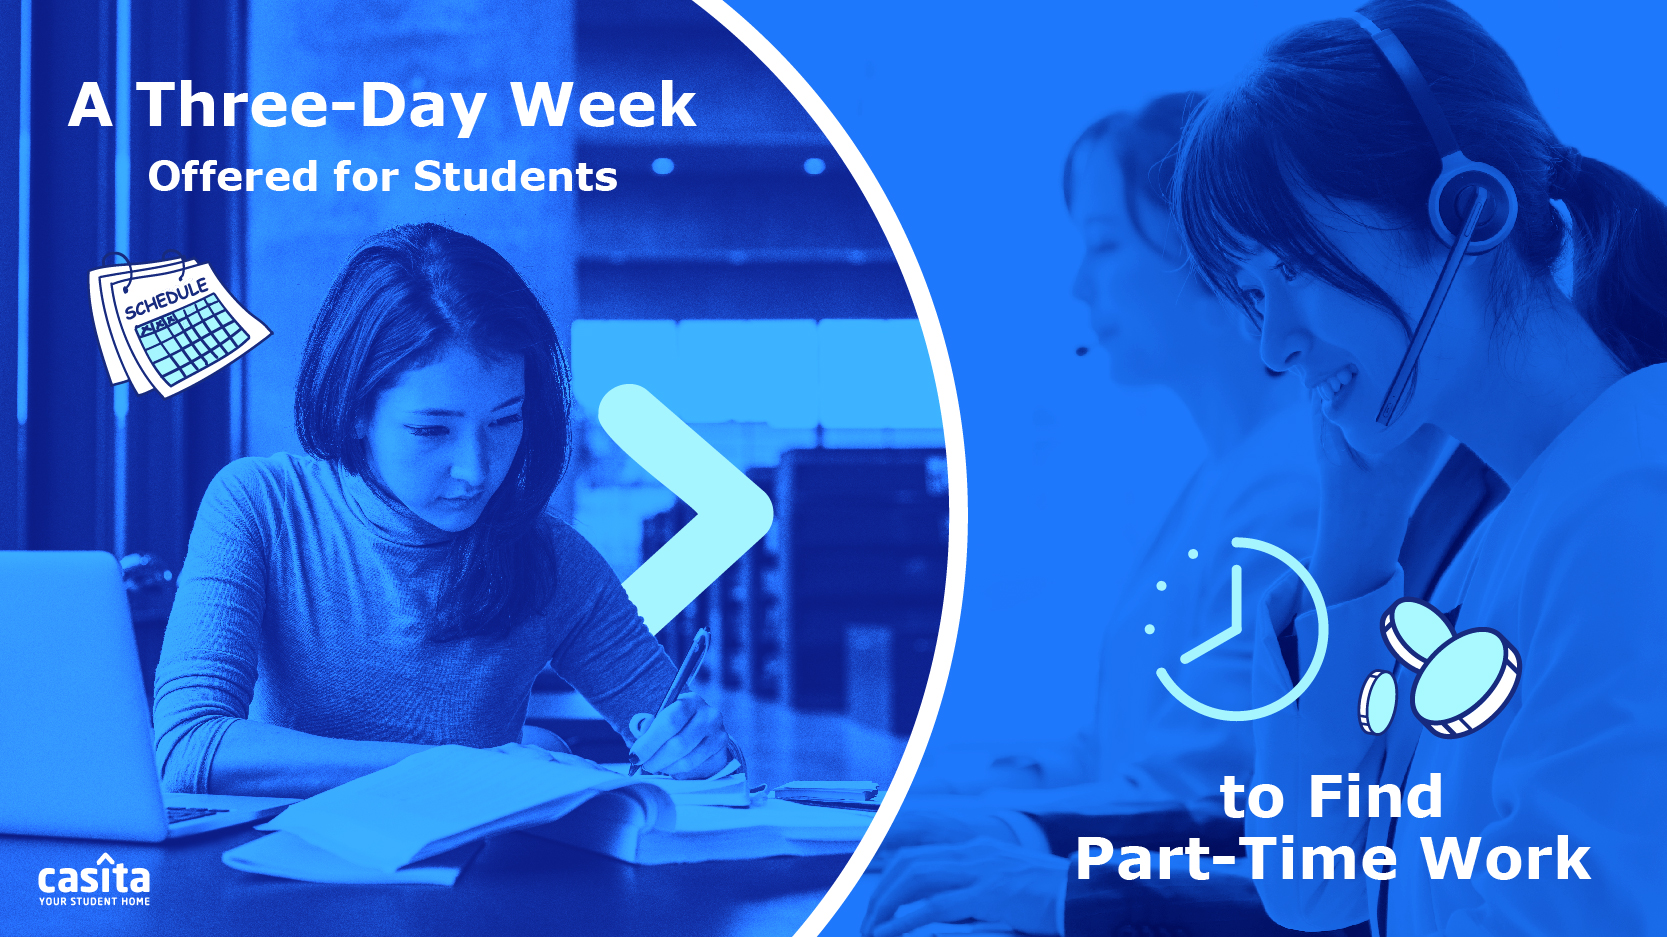 A Three-Day Week Offered for Students to Find Part-Time Work